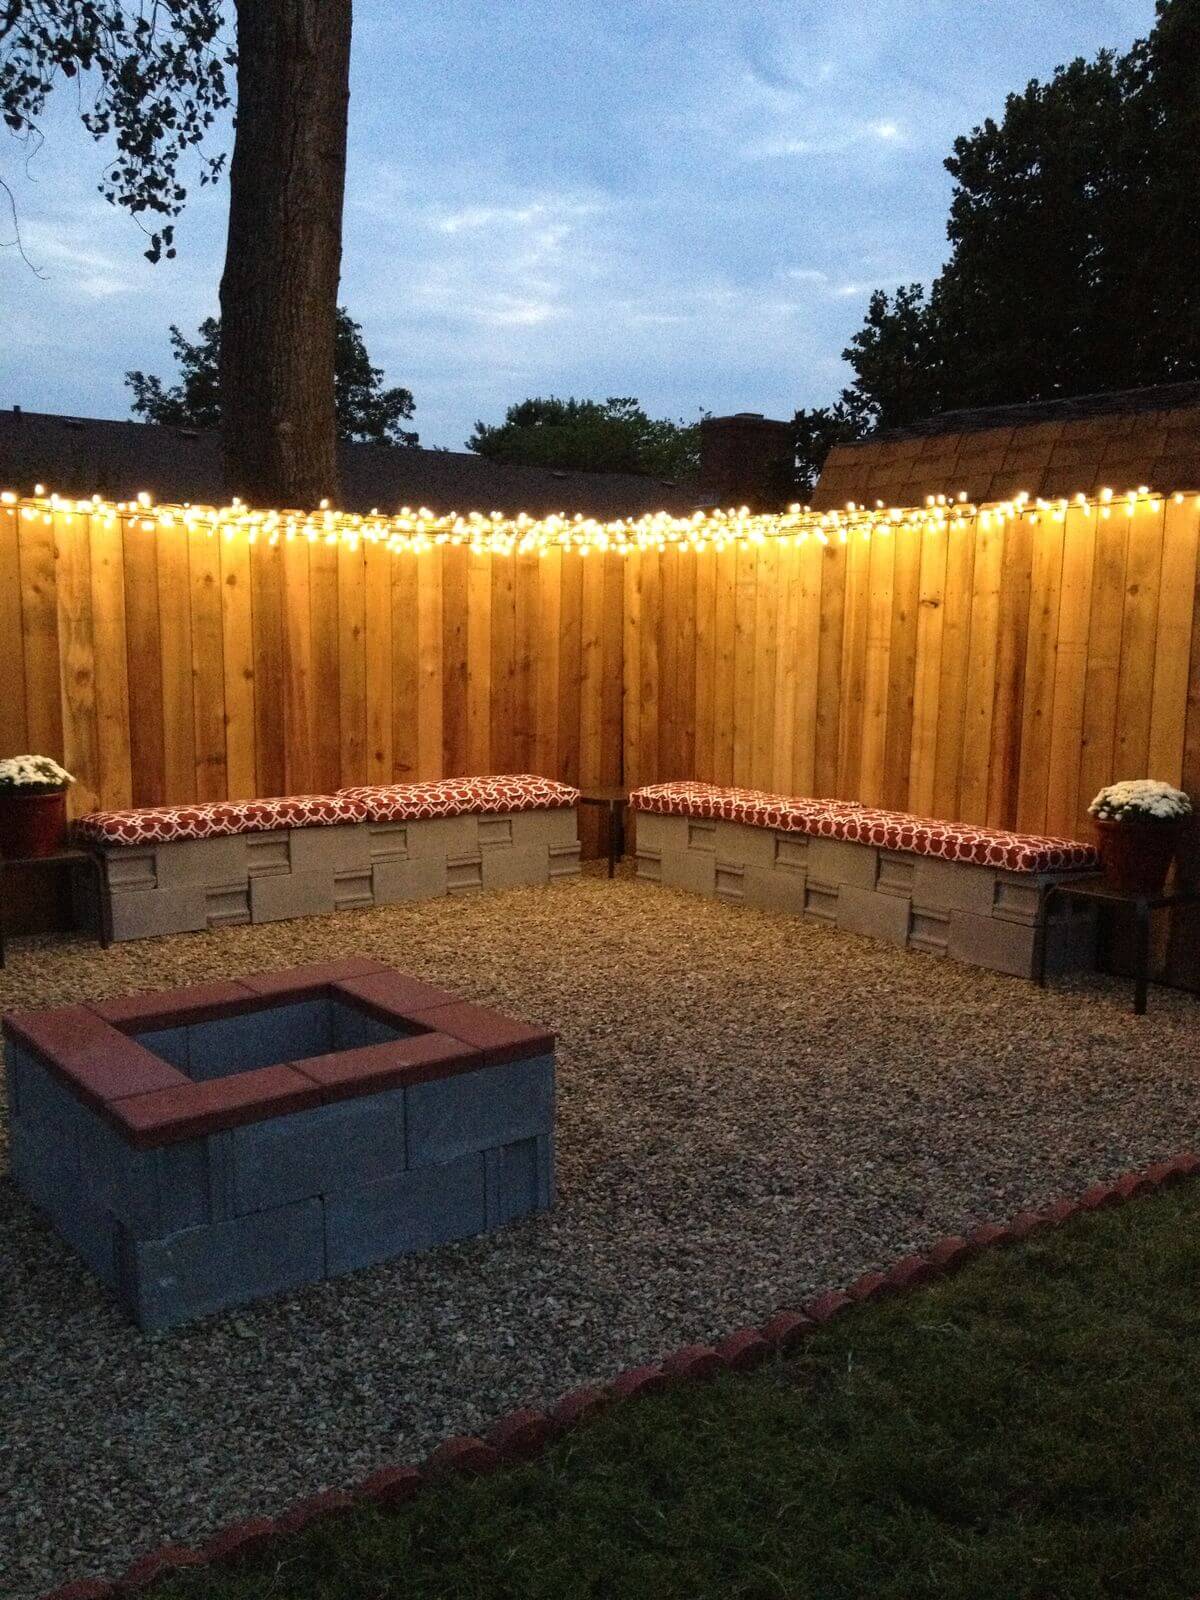 Fairy Light Fence and Cinder Block Benches